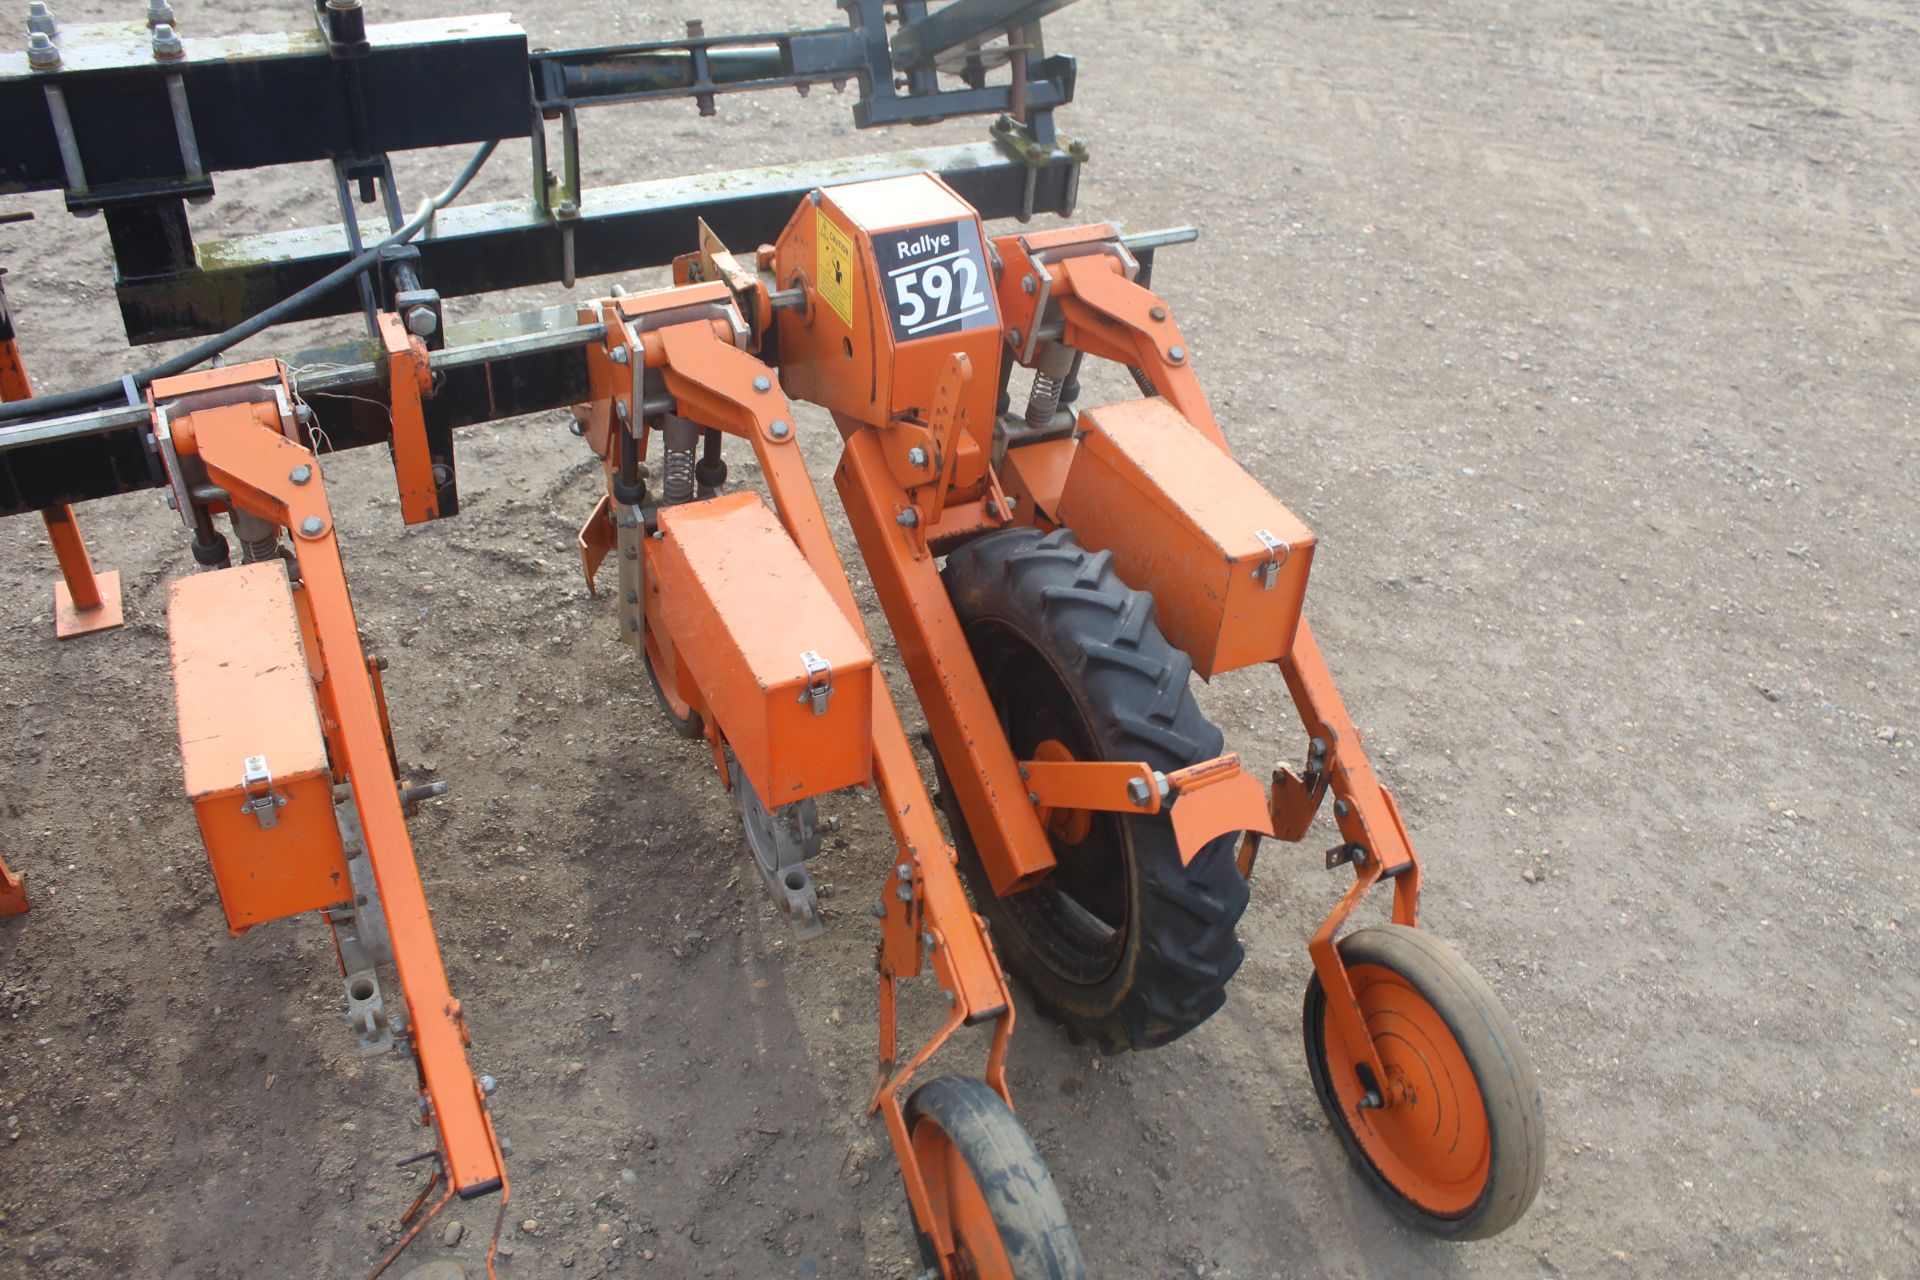 Stanhay Rallye 592 hdraulic folding 12 row beet drill. With bout markers. For spares or repair. V - Bild 20 aus 26